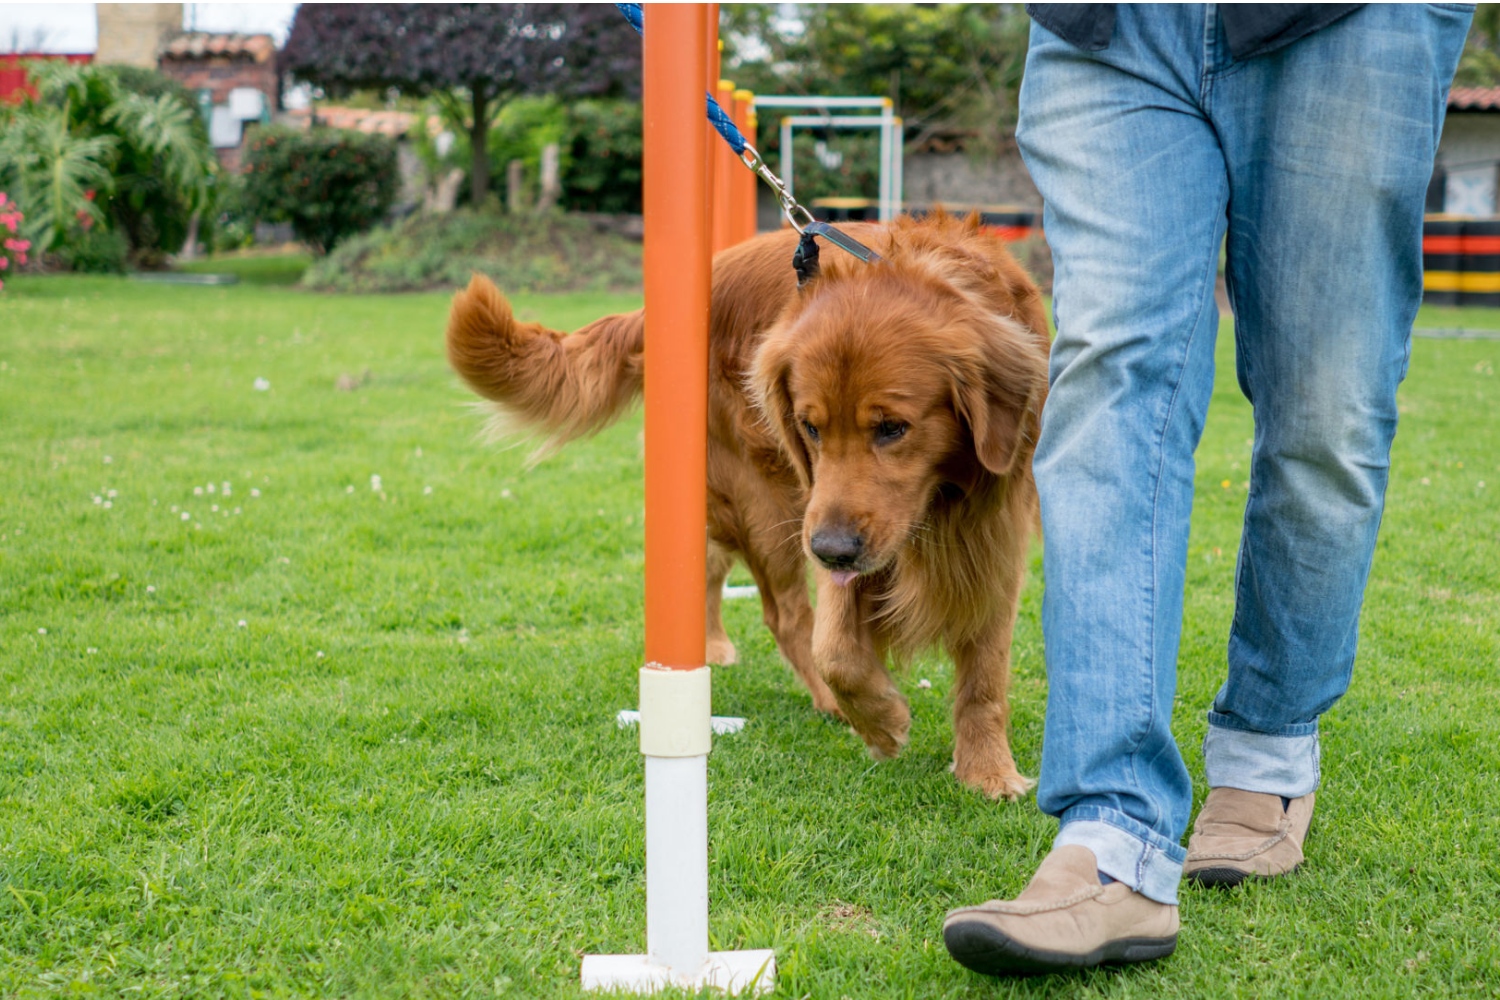 The 5 Qualities to Look for in a Dog Trainer